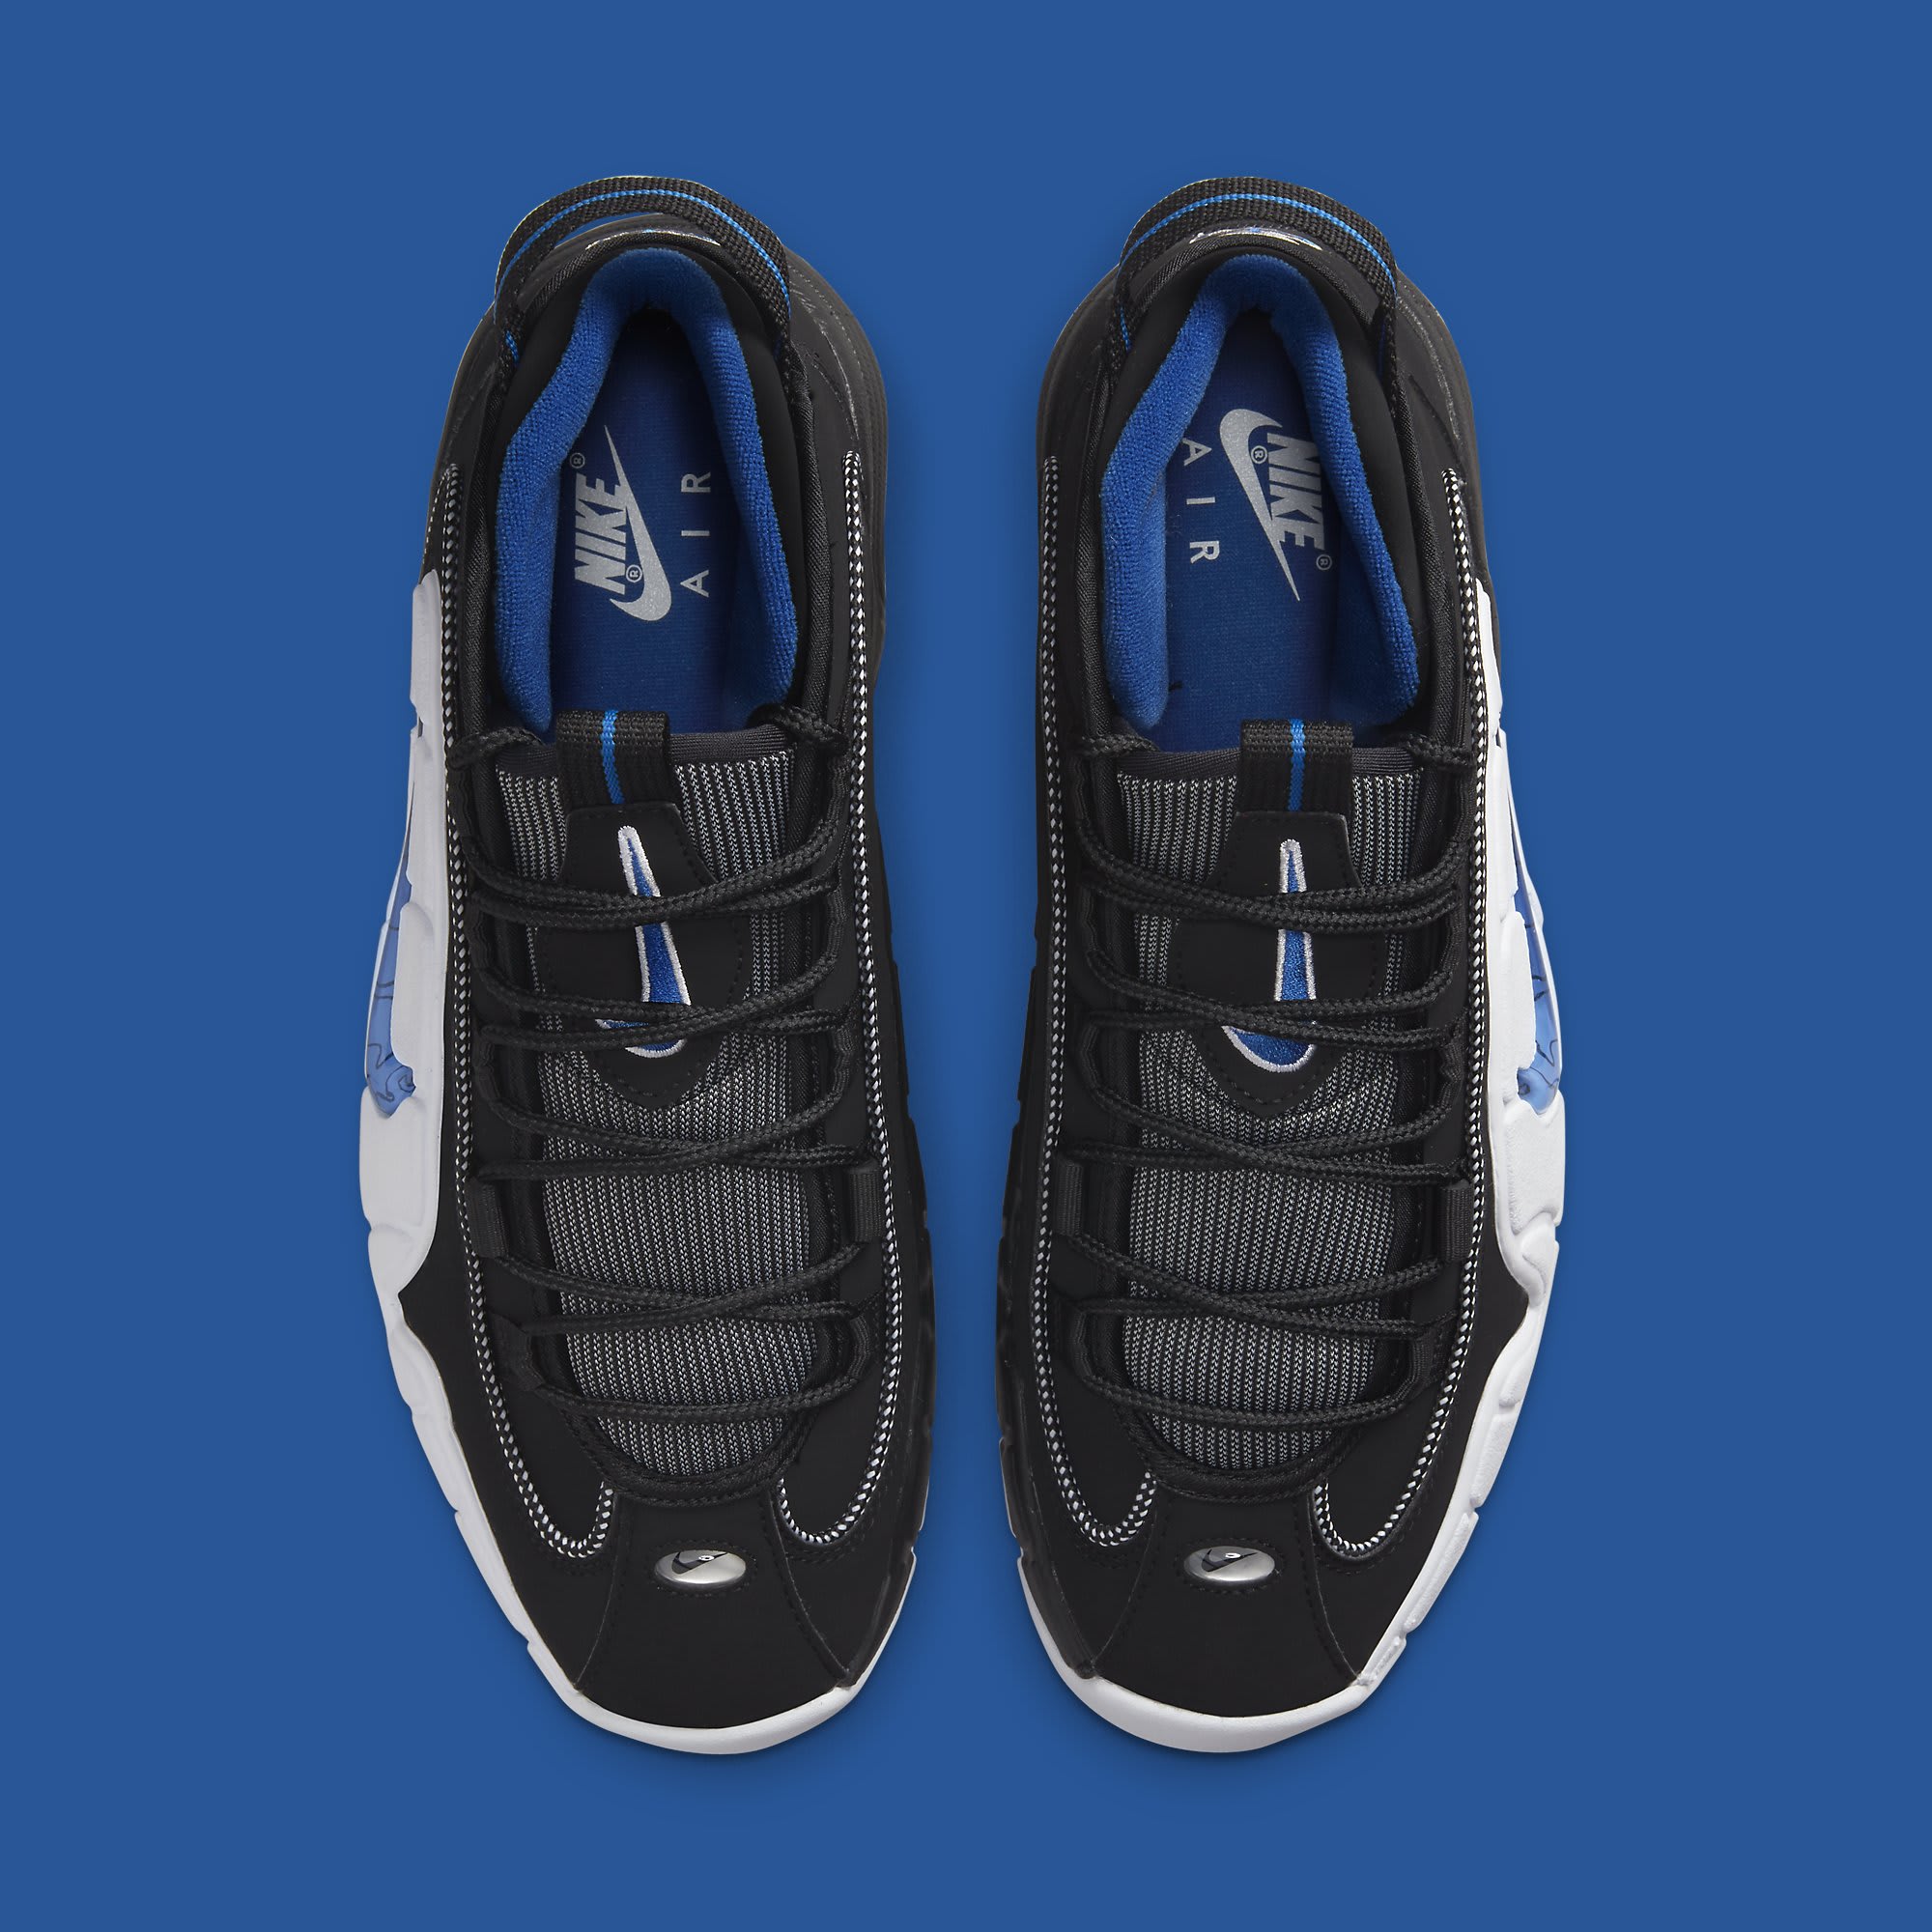 Nike Air Max Penny 1 Orlando Release Date Dn2487-001 Top